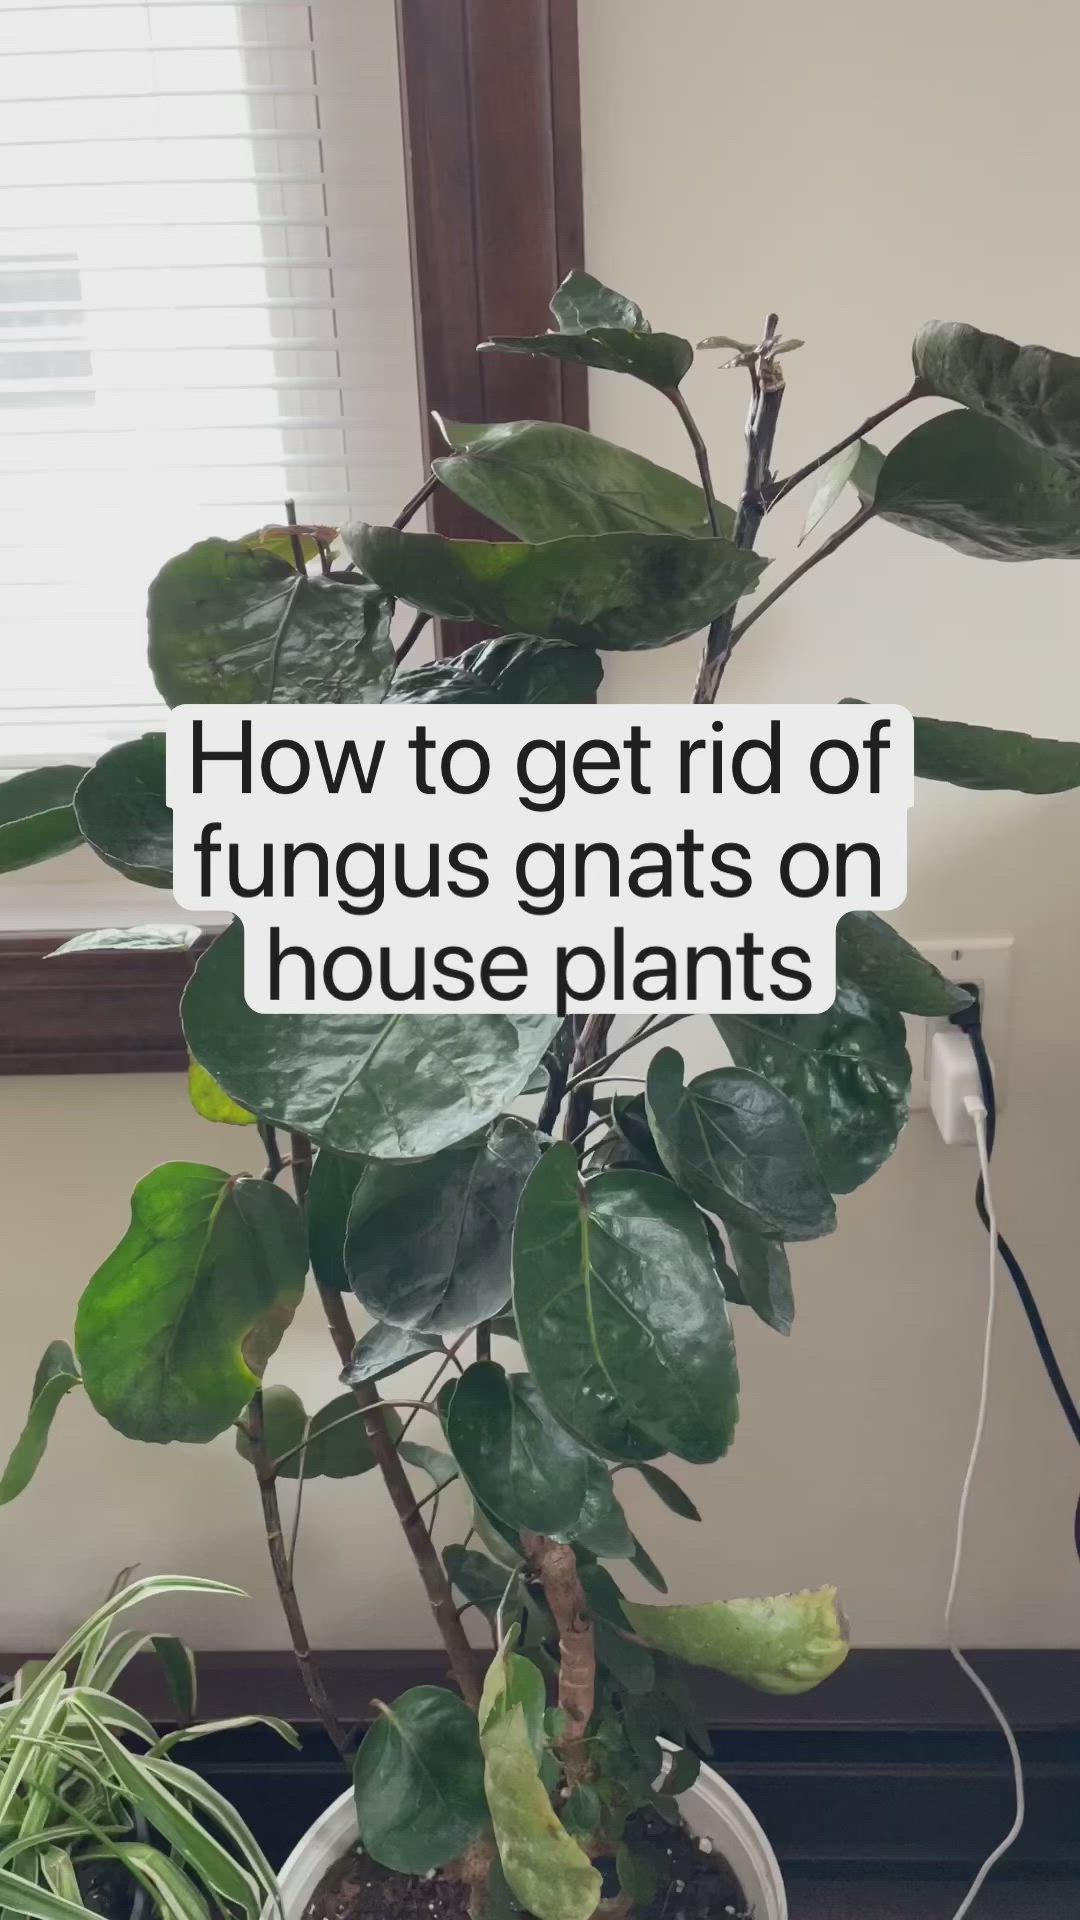 This contains an image of: How to get rid of fungus gnats on house plants